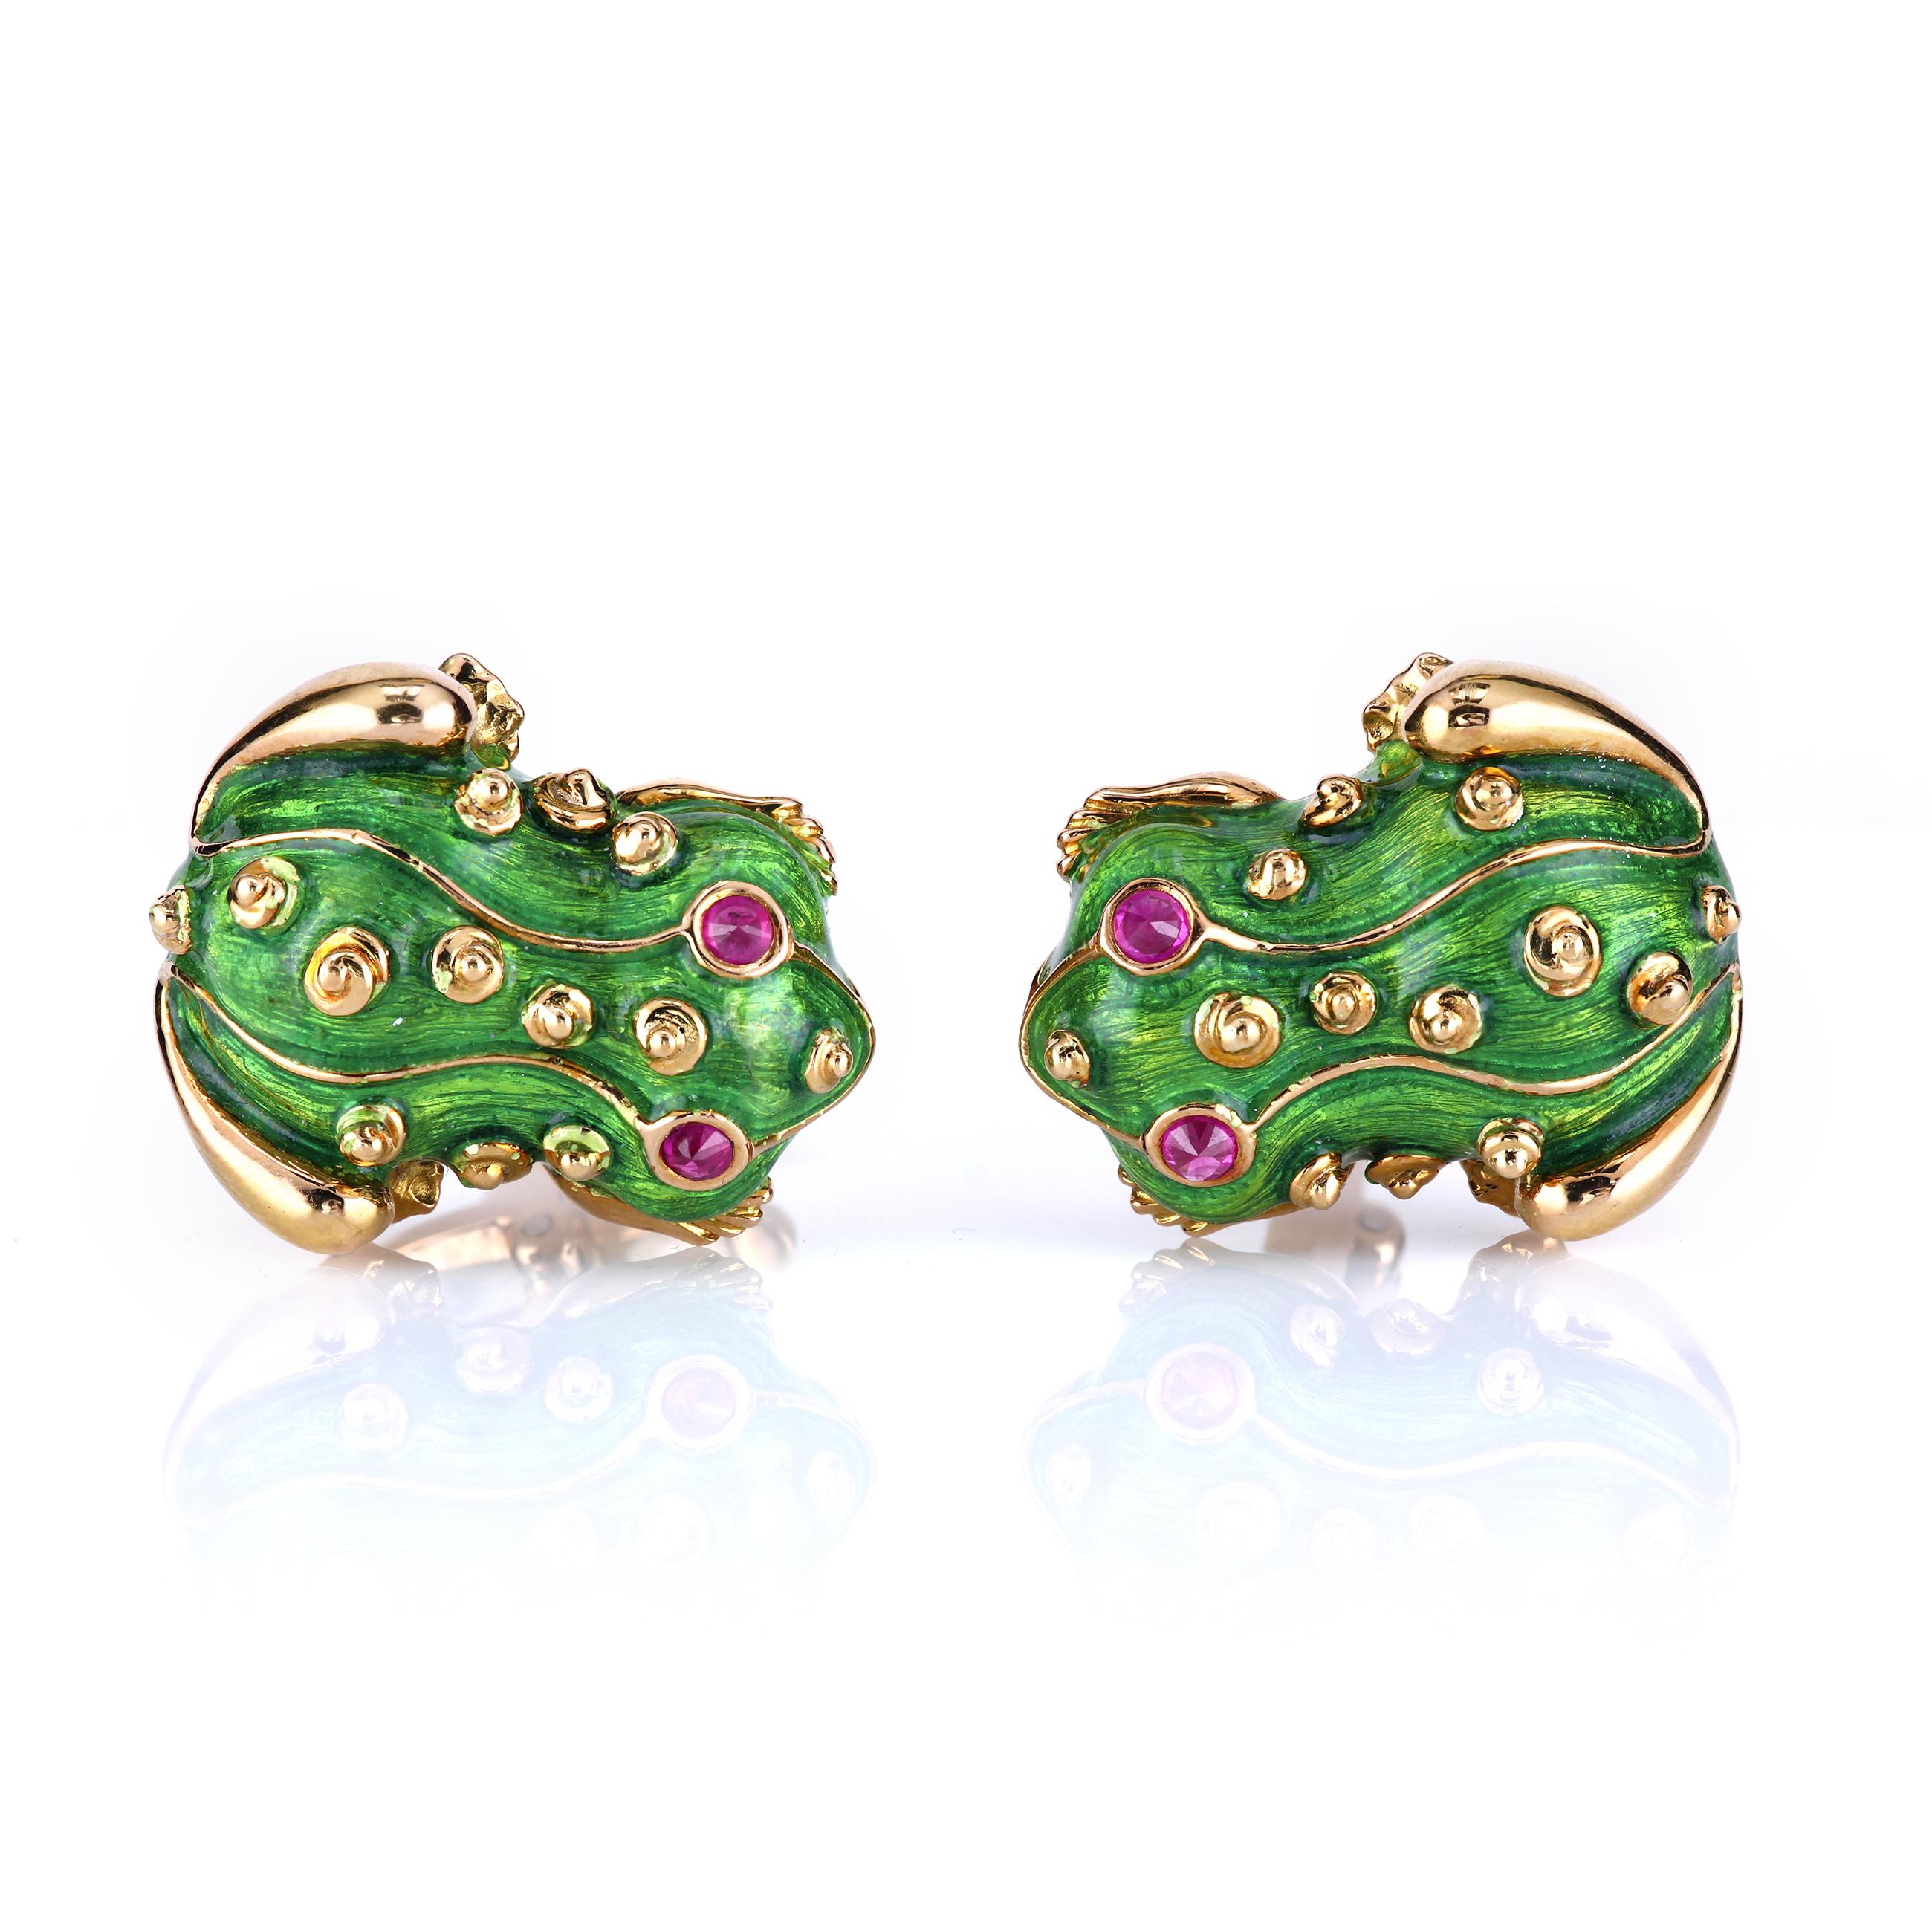 The frog cufflinks are beautifully rendered in Guilloche enamel in vibrant shamrock green color layered over 18K patterned gold and inset with exquisite rubies (set upside-down for a dramatic effect). 
Guilloche (Basse Taille) vibrant green